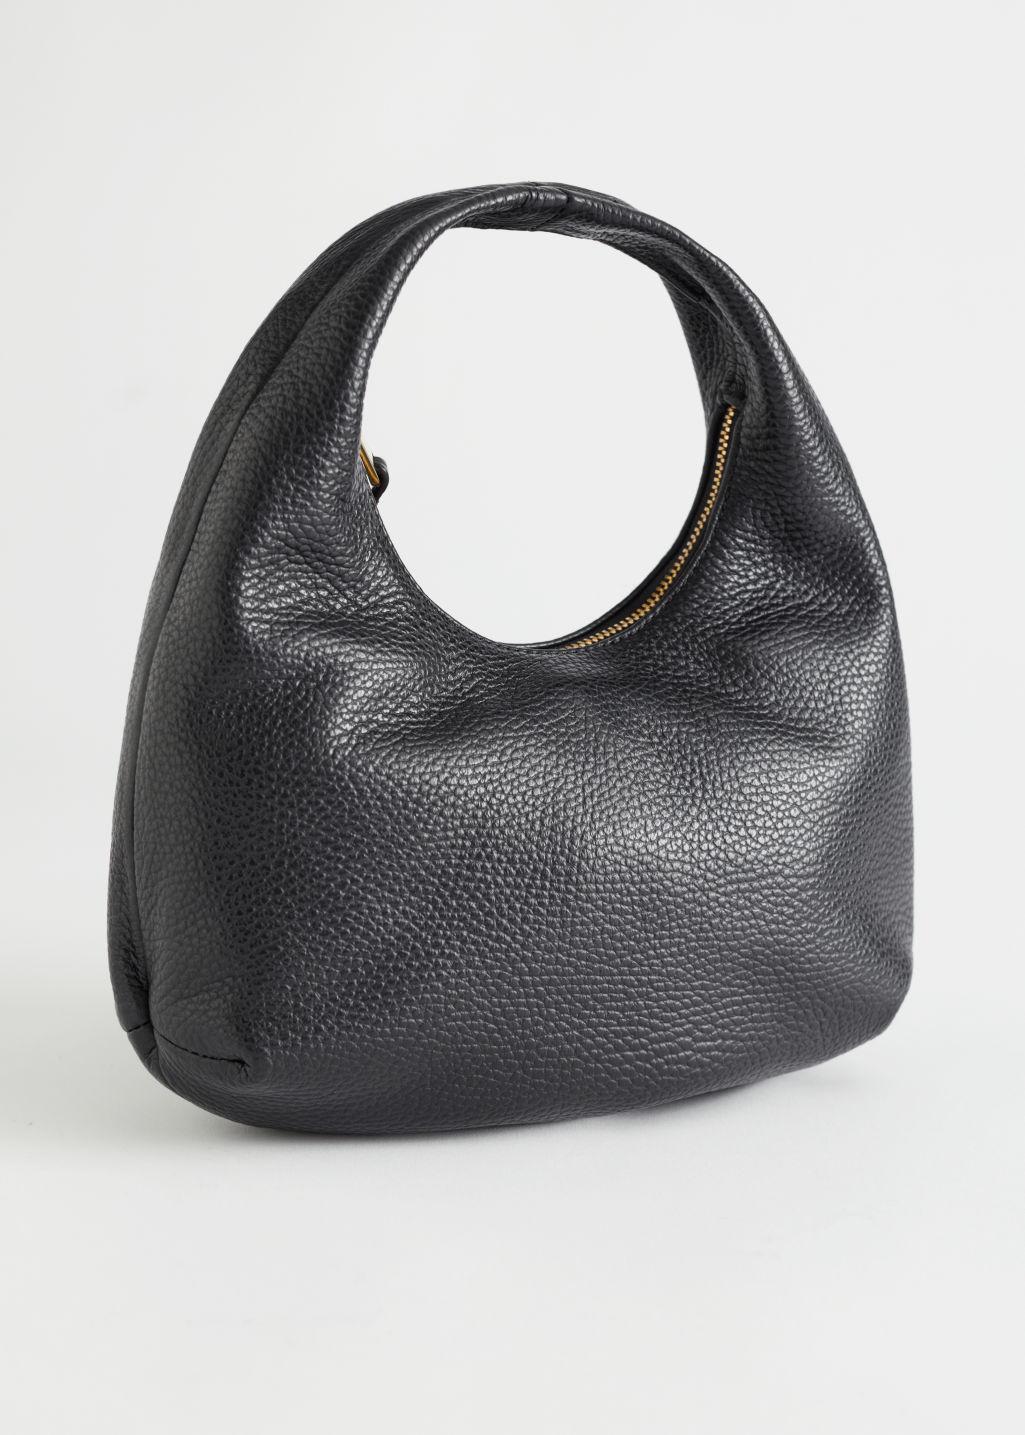 & Other Stories Leather Hand Bag in Black | Lyst